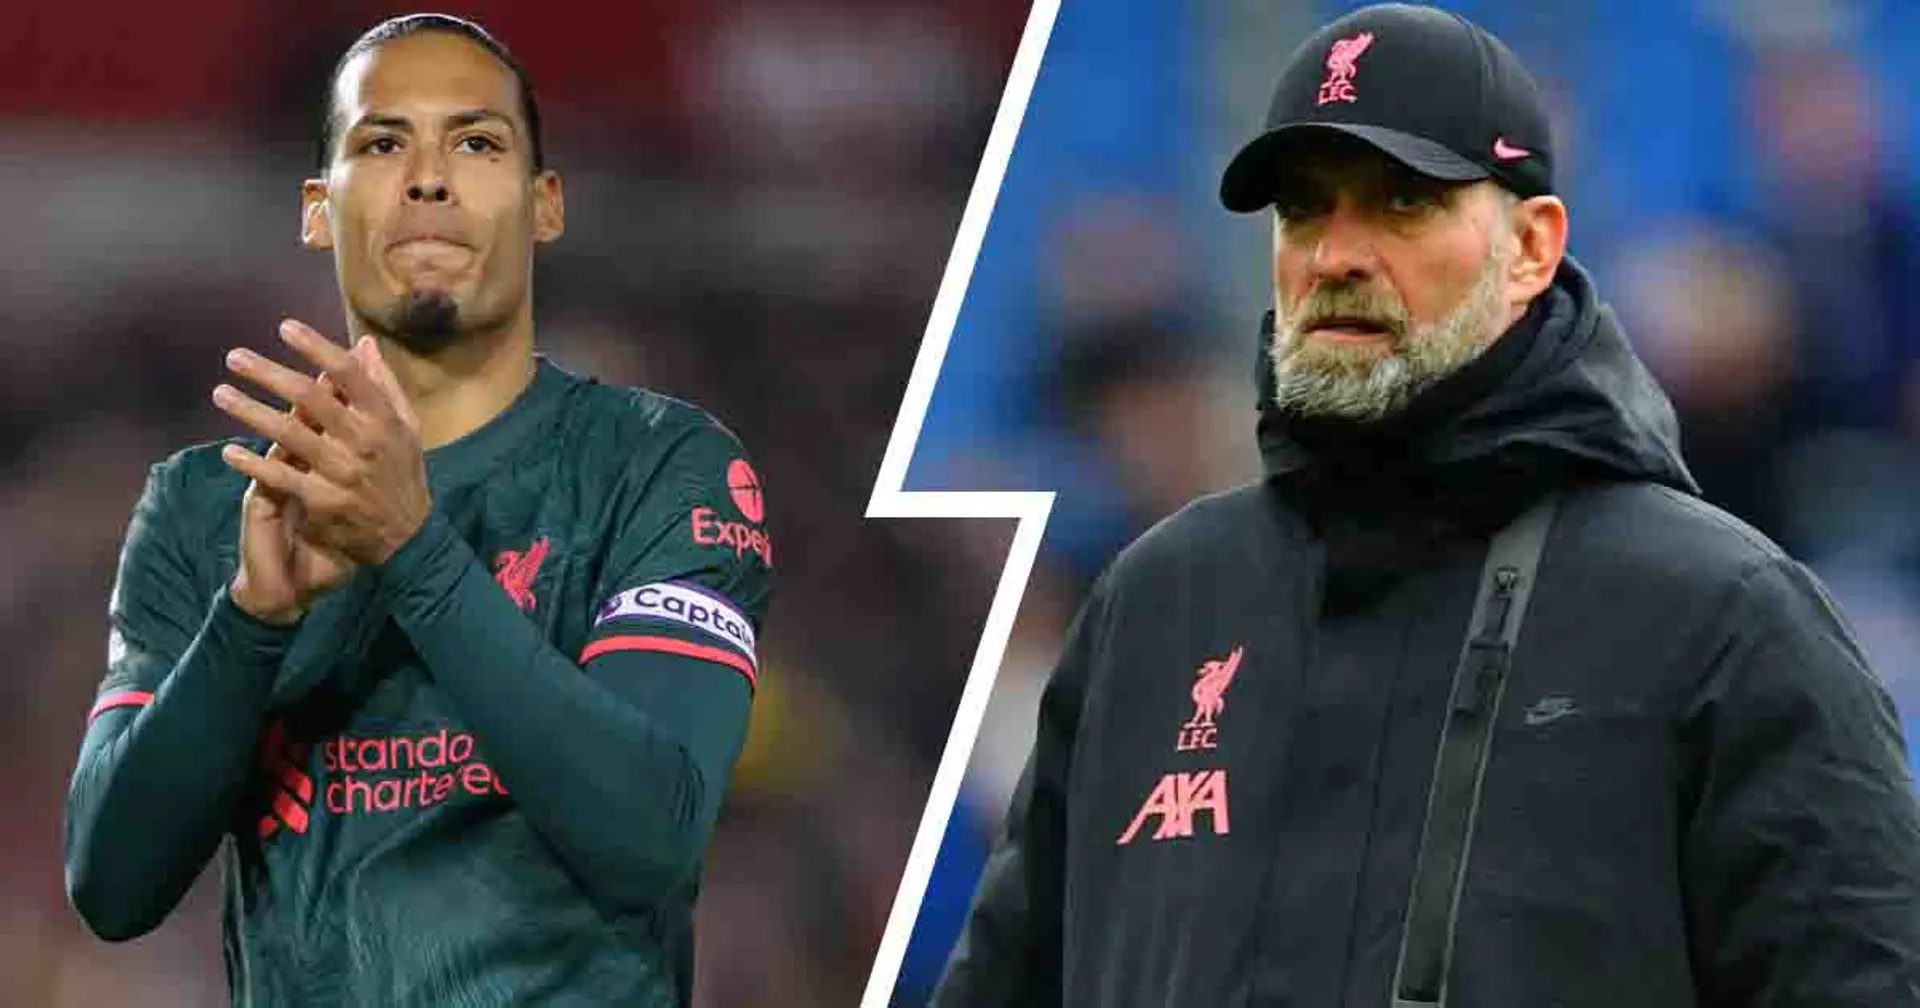 Injury expert doesn't expect Van Dijk to play against Everton, predicts possible return timeframe